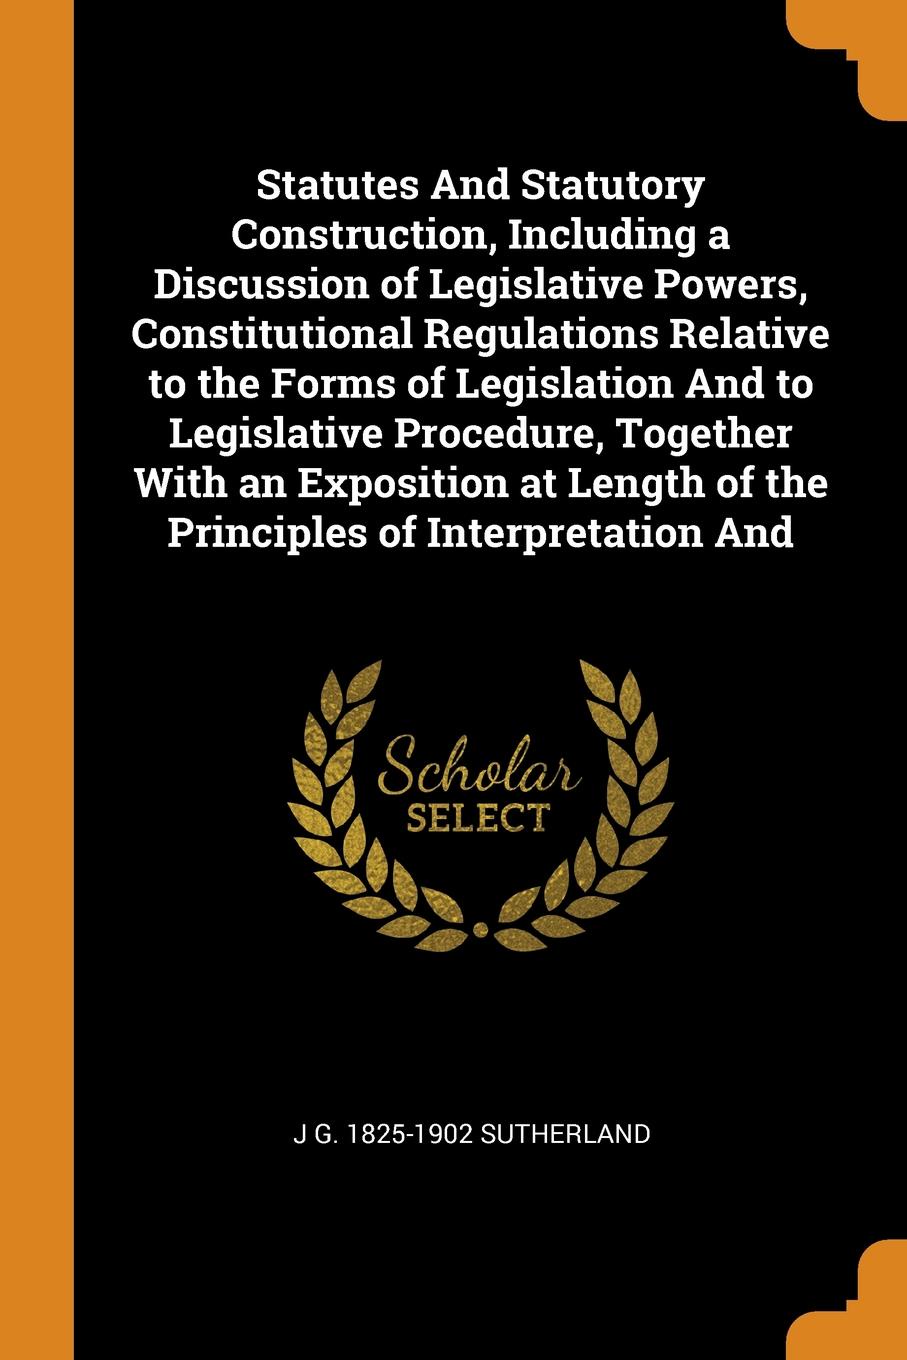 Statutes And Statutory Construction, Including a Discussion of Legislative Powers, Constitutional Regulations Relative to the Forms of Legislation And to Legislative Procedure, Together With an Exposition at Length of the Principles of Interpretat...